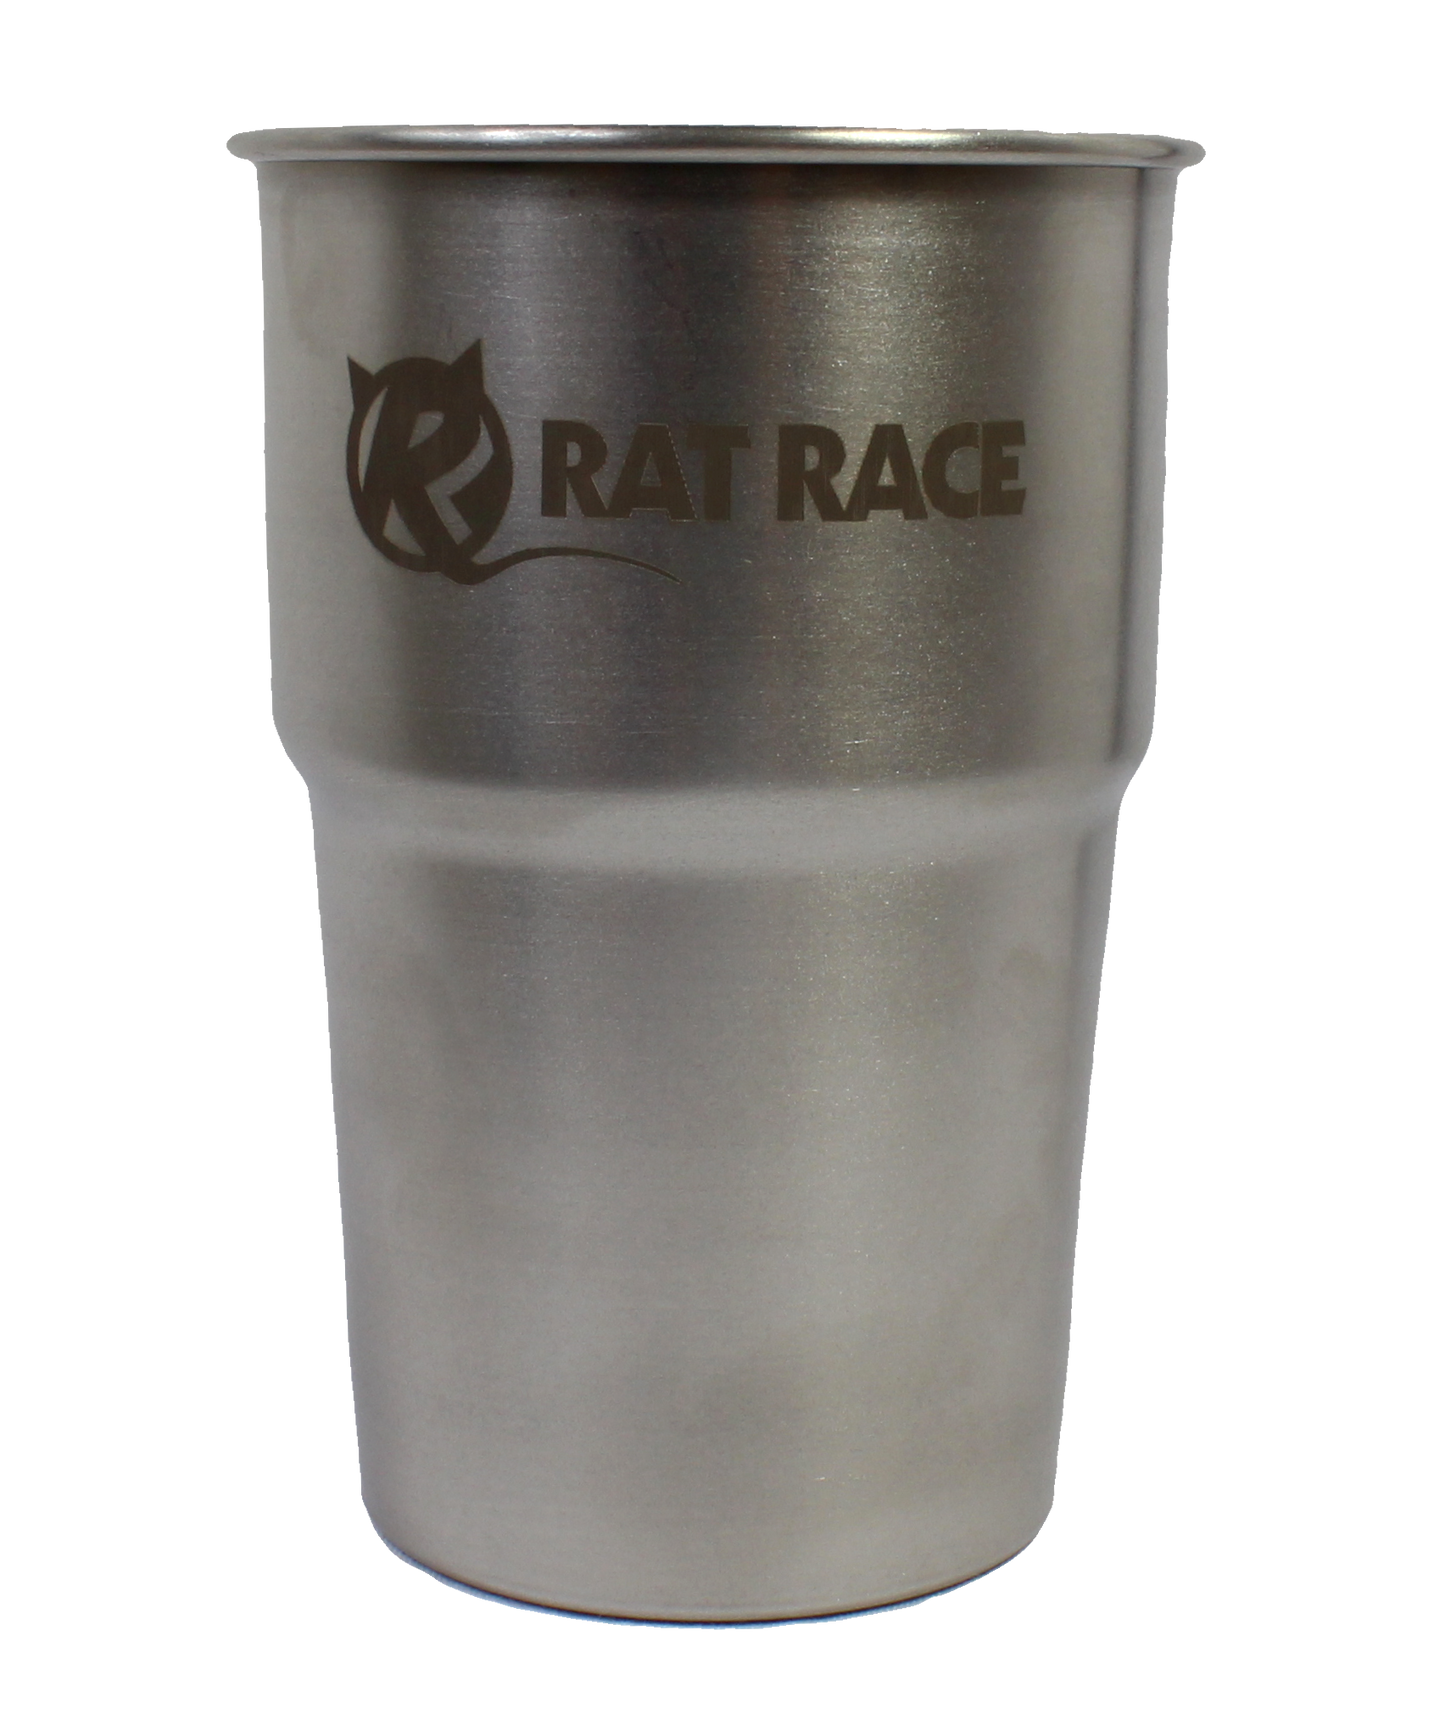 Rat Race Stainless Steel Recycled Drinking Cup